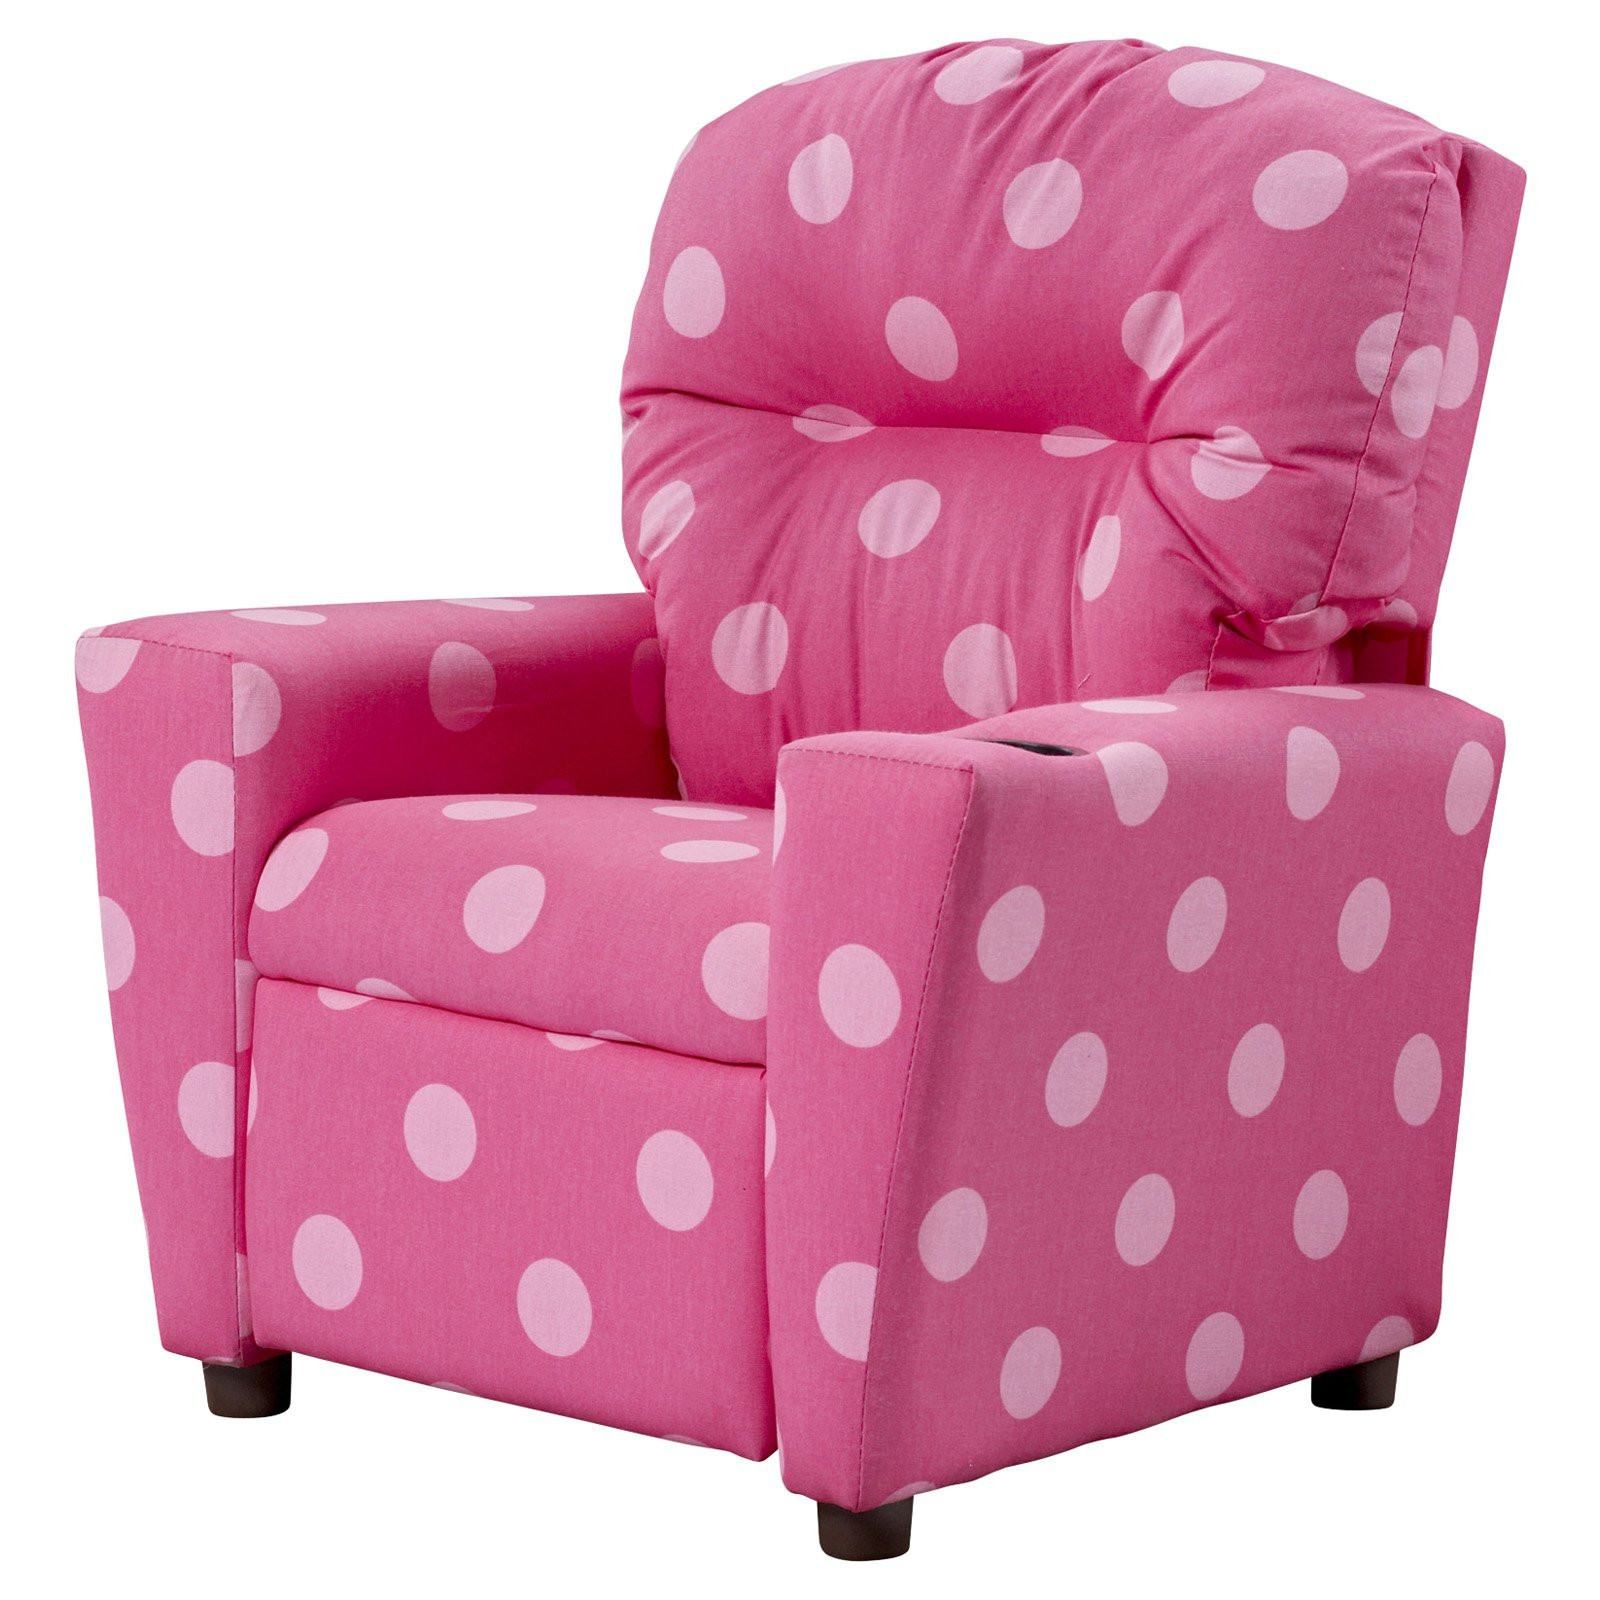 Trendy Perfect 20 Top Kids Sofa Chair And Ottoman Set Zebra Pink Kids Chair Within Kids Sofa Chair And Ottoman Set Zebra (View 9 of 20)